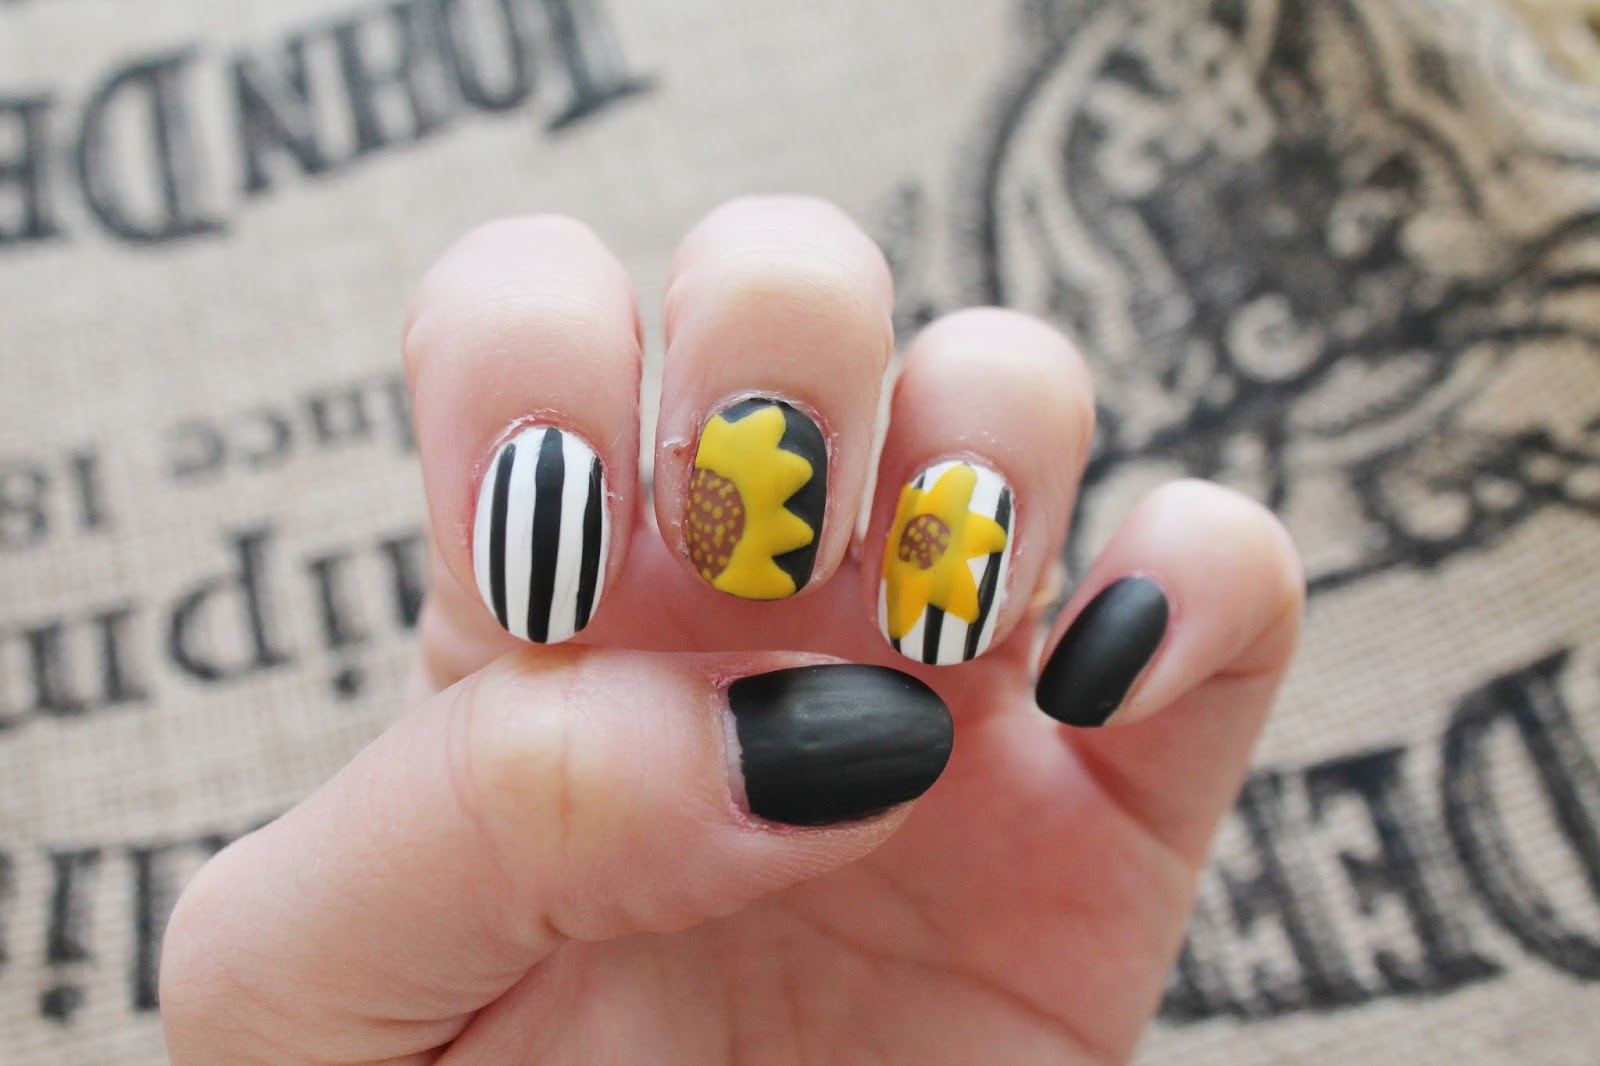 4. Nail Art and Design Services in Tampa - wide 5